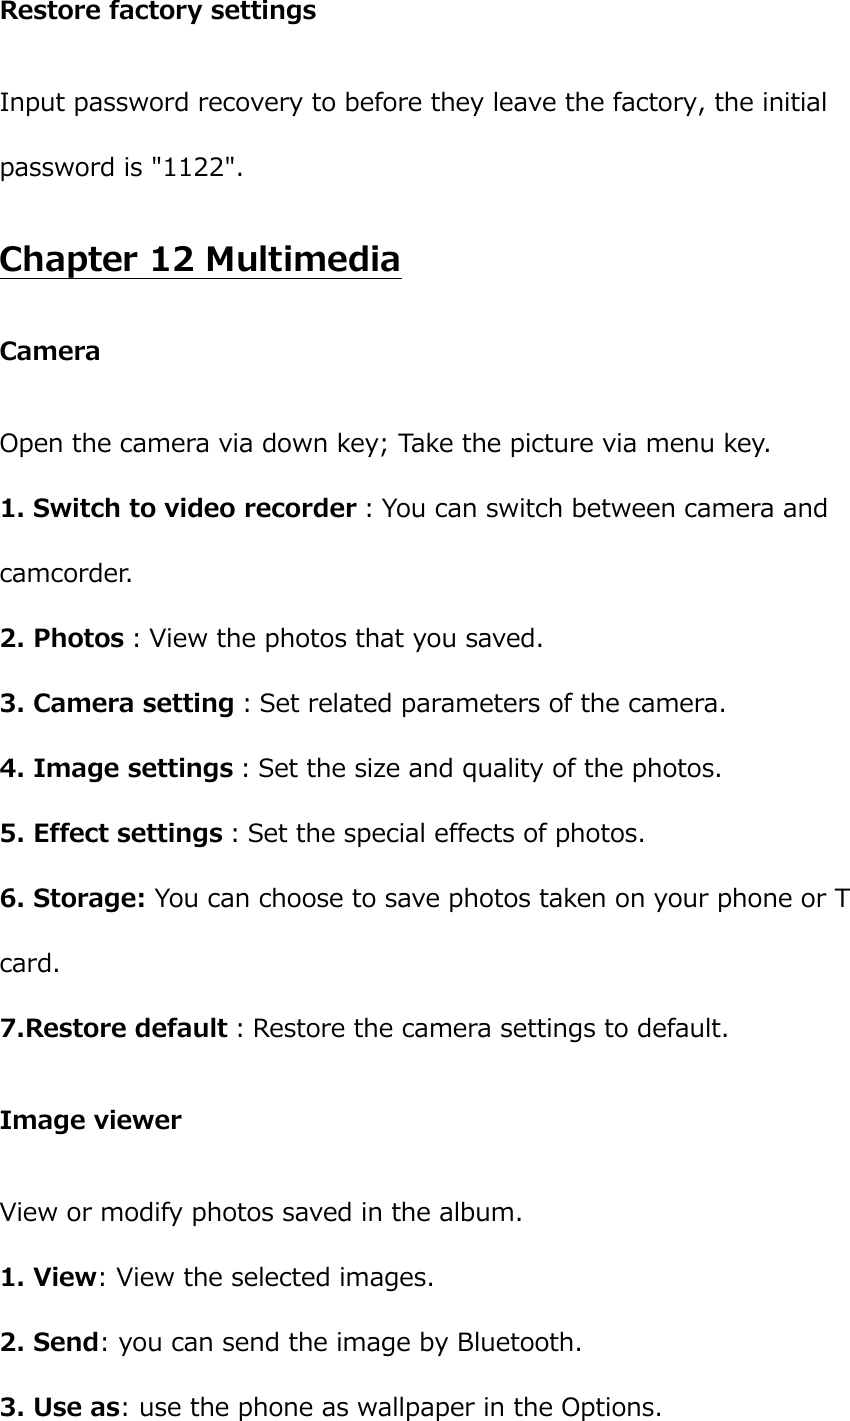  Restore factory settings Input password recovery to before they leave the factory, the initial password is &quot;1122&quot;. Chapter 12 Multimedia Camera Open the camera via down key; Take the picture via menu key. 1. Switch to video recorder：You can switch between camera and camcorder. 2. Photos：View the photos that you saved.   3. Camera setting：Set related parameters of the camera.   4. Image settings：Set the size and quality of the photos. 5. Effect settings：Set the special effects of photos.   6. Storage: You can choose to save photos taken on your phone or T card. 7.Restore default：Restore the camera settings to default. Image viewer View or modify photos saved in the album.   1. View: View the selected images. 2. Send: you can send the image by Bluetooth. 3. Use as: use the phone as wallpaper in the Options. 